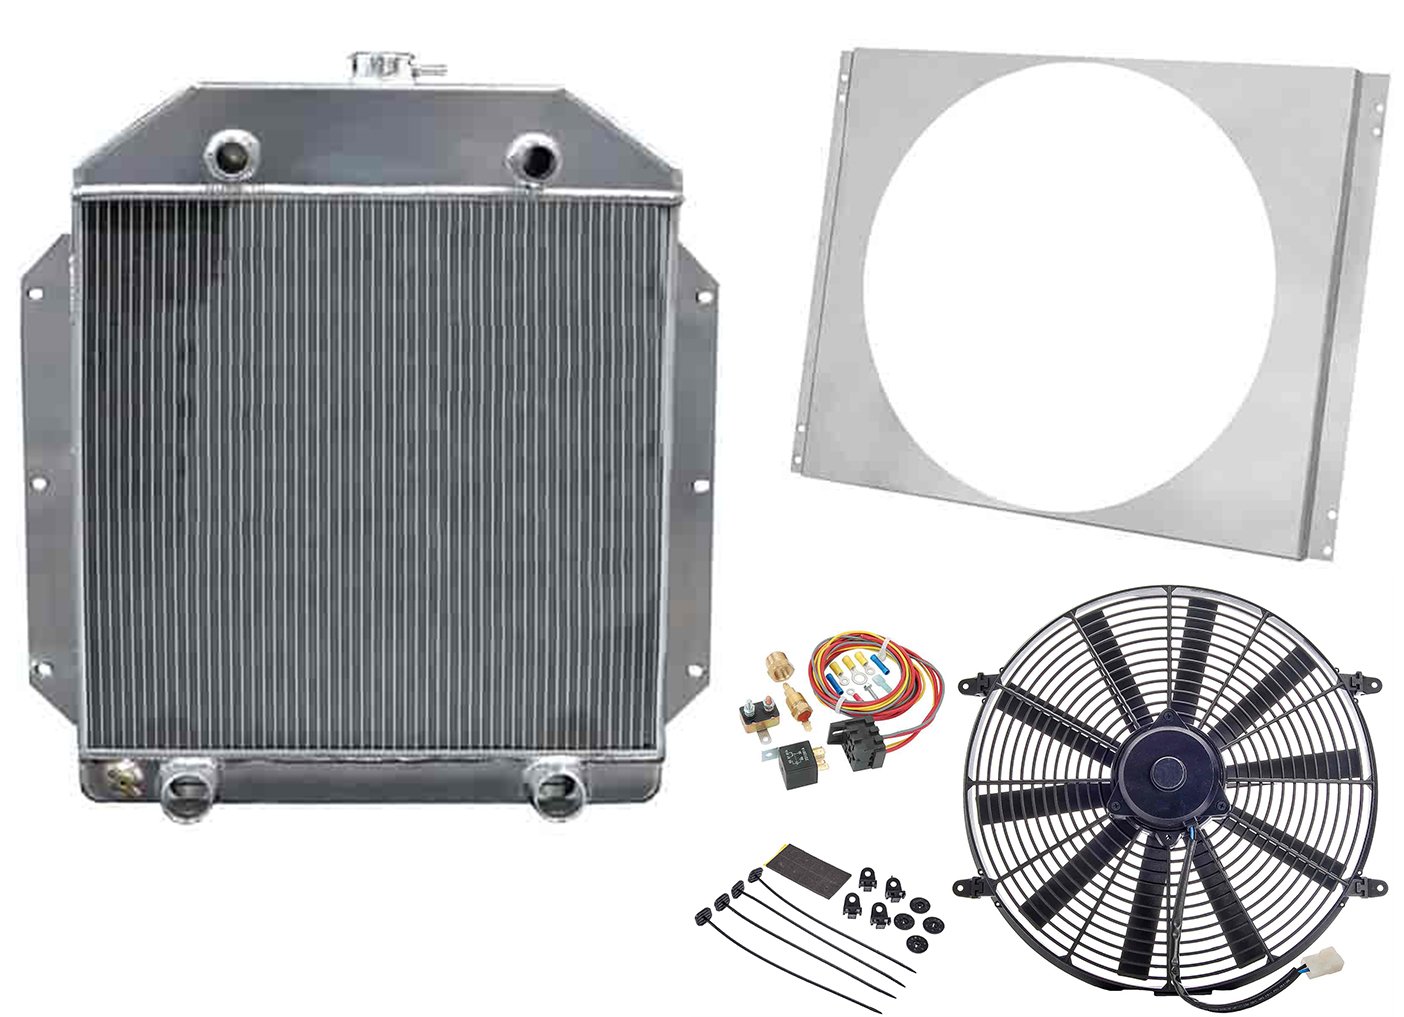 All-Aluminum Radiator System Kit 1949-1953 Ford Car with